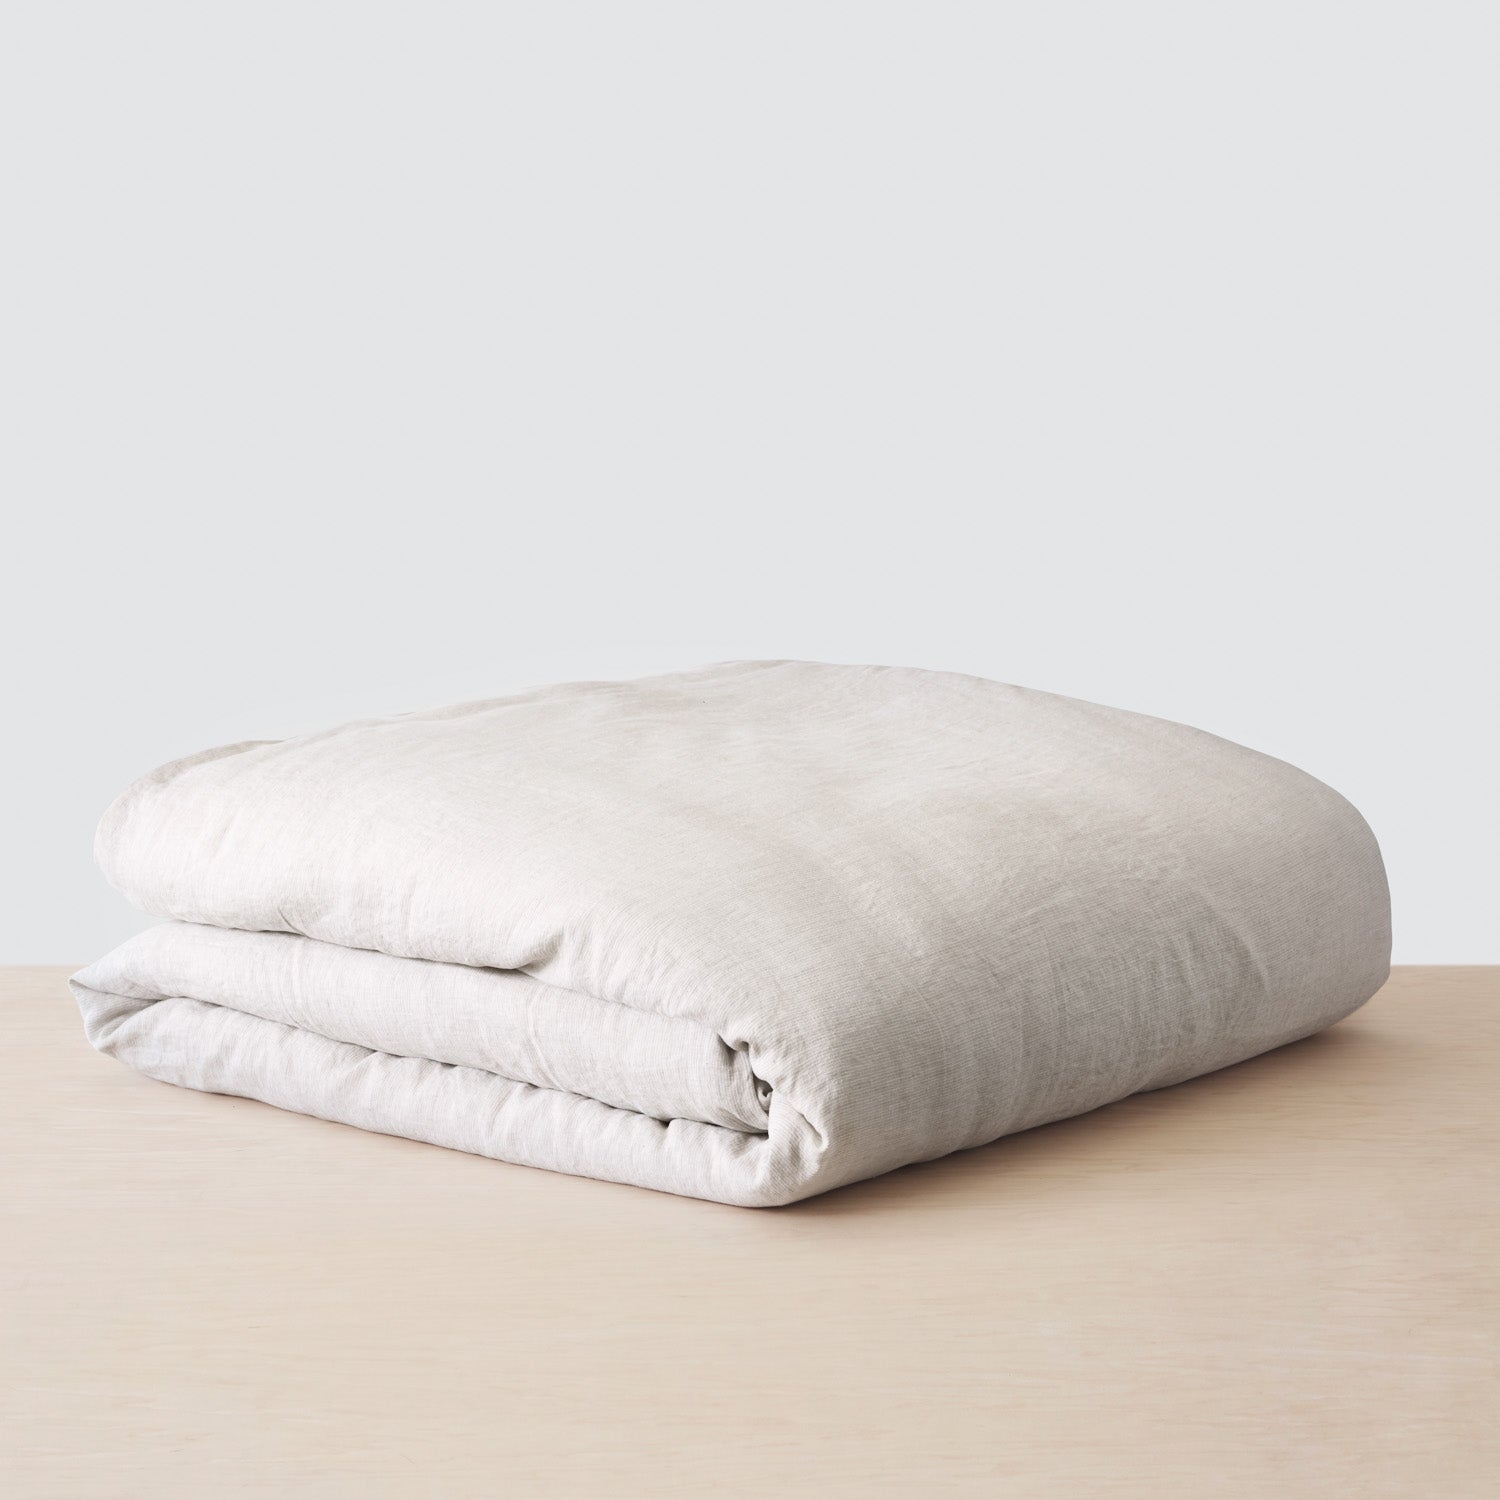 The Citizenry Stonewashed Linen Duvet Cover | Full/Queen | Duvet Only | Sienna - Image 8